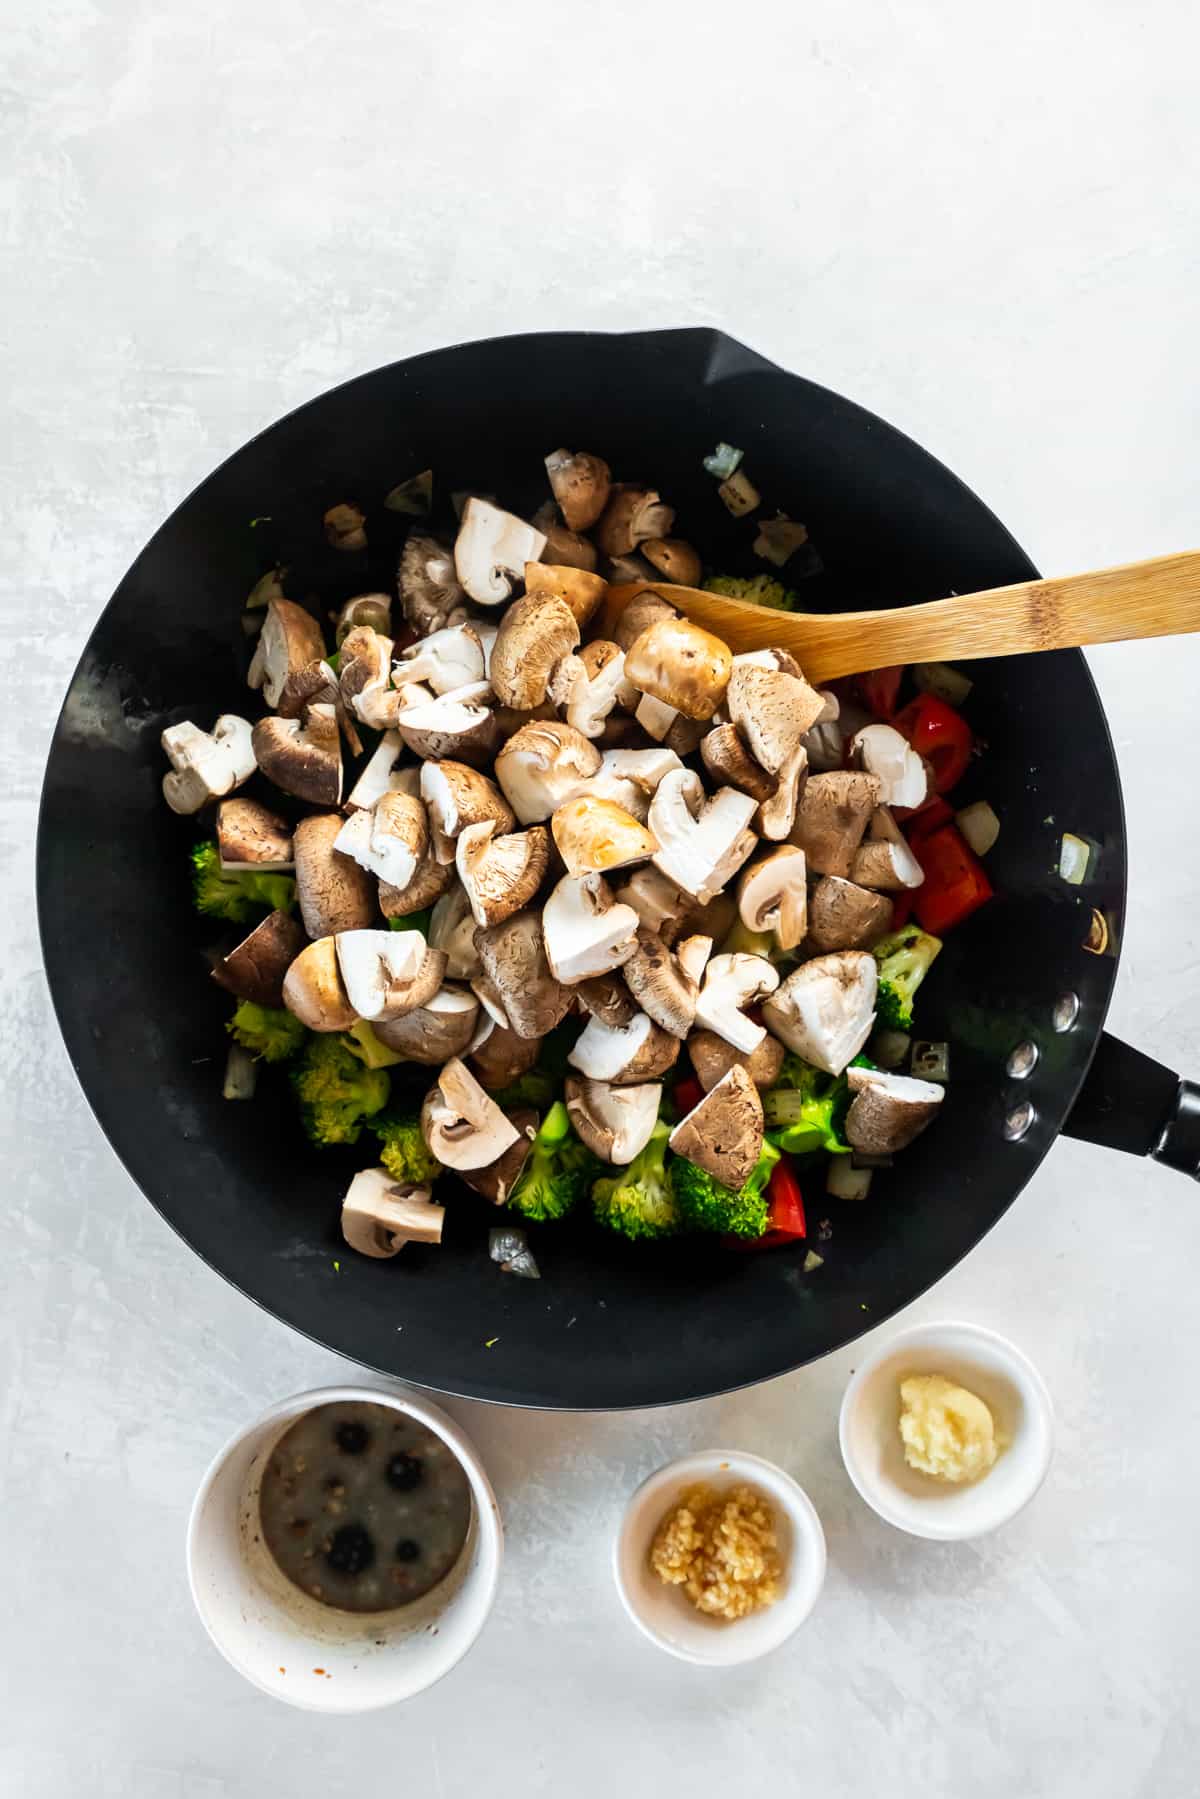 Mushrooms in a wok on top of other vegetables.